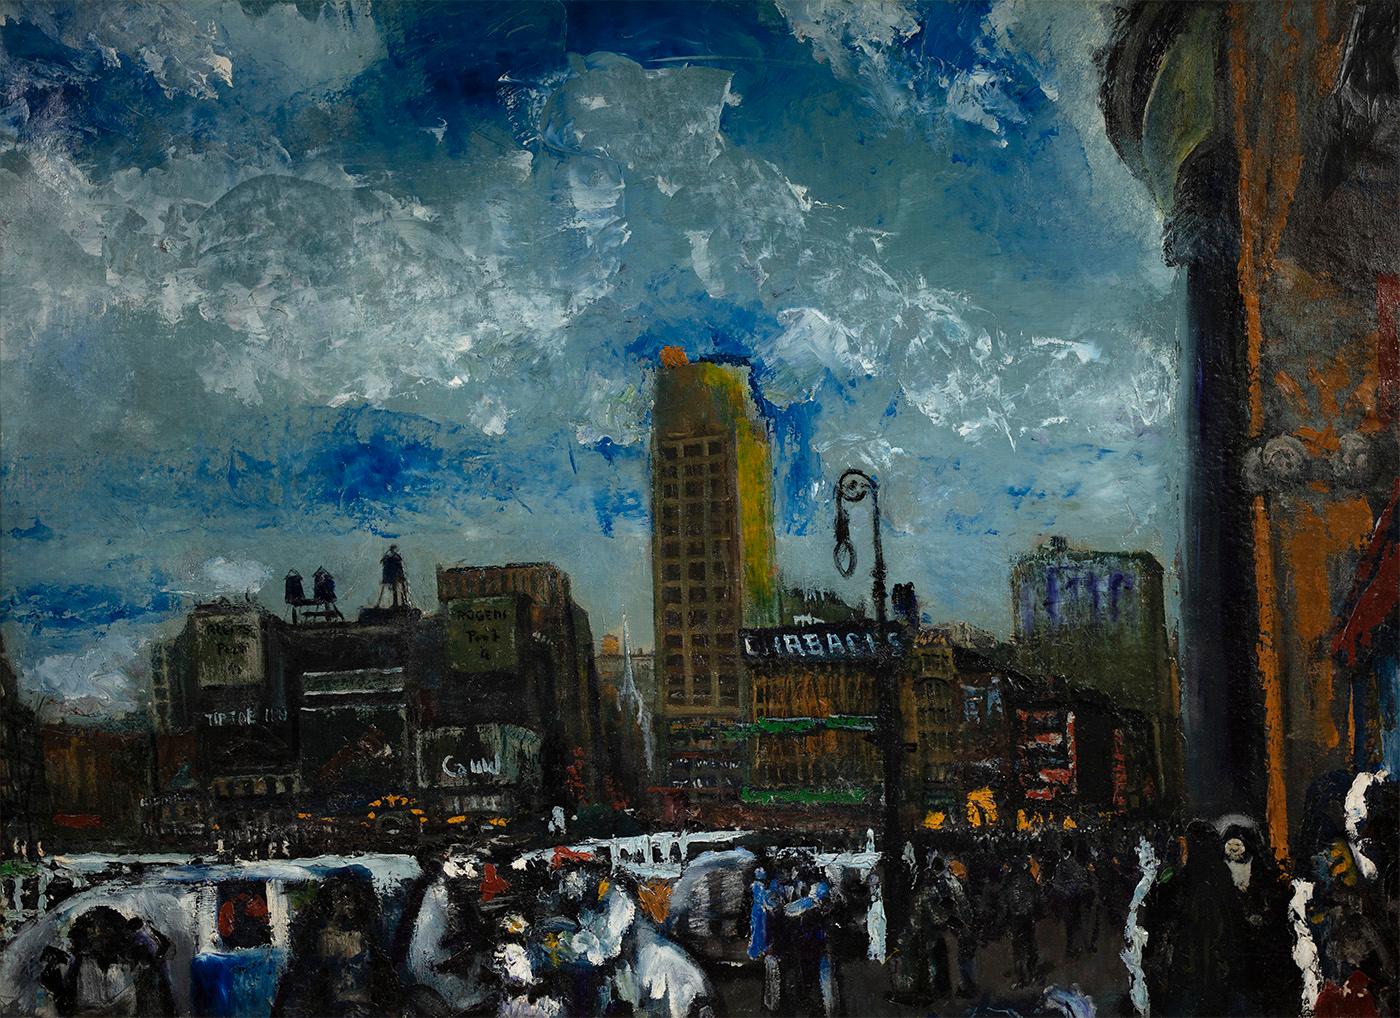 Union Square  - Painting by Clifford Isaac Addams